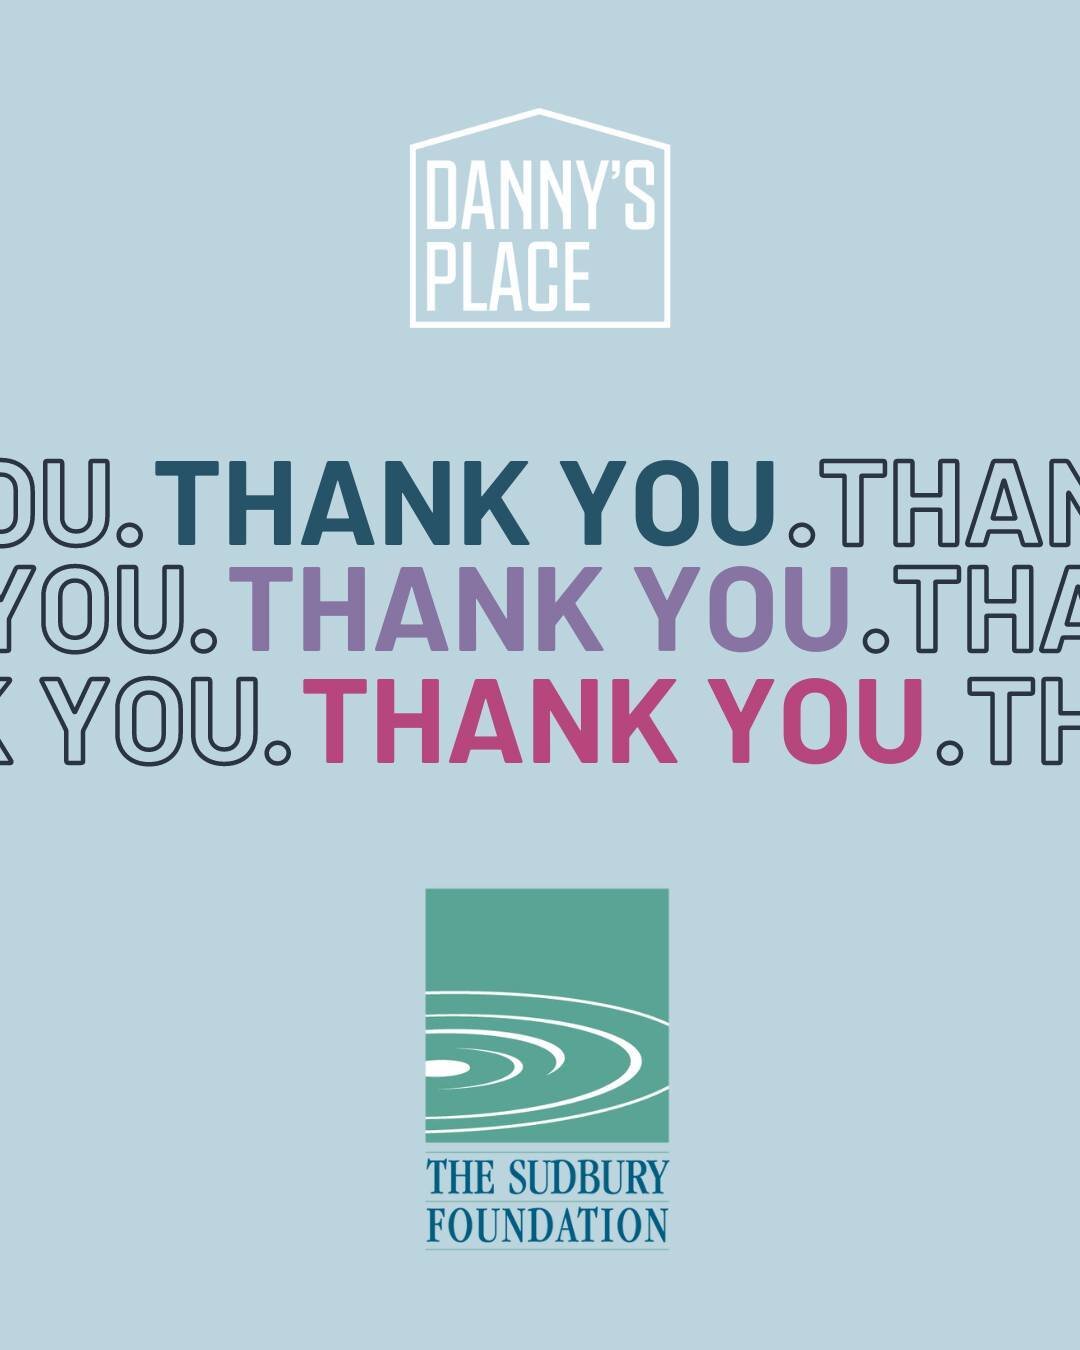 Our hearts are overflowing with gratitude for the Sudbury Foundation's enduring support of Danny's Place Programs. Through their generous Youth Emotional Well-Being Grant, we were able to offer vital resources and opportunities to young people in our